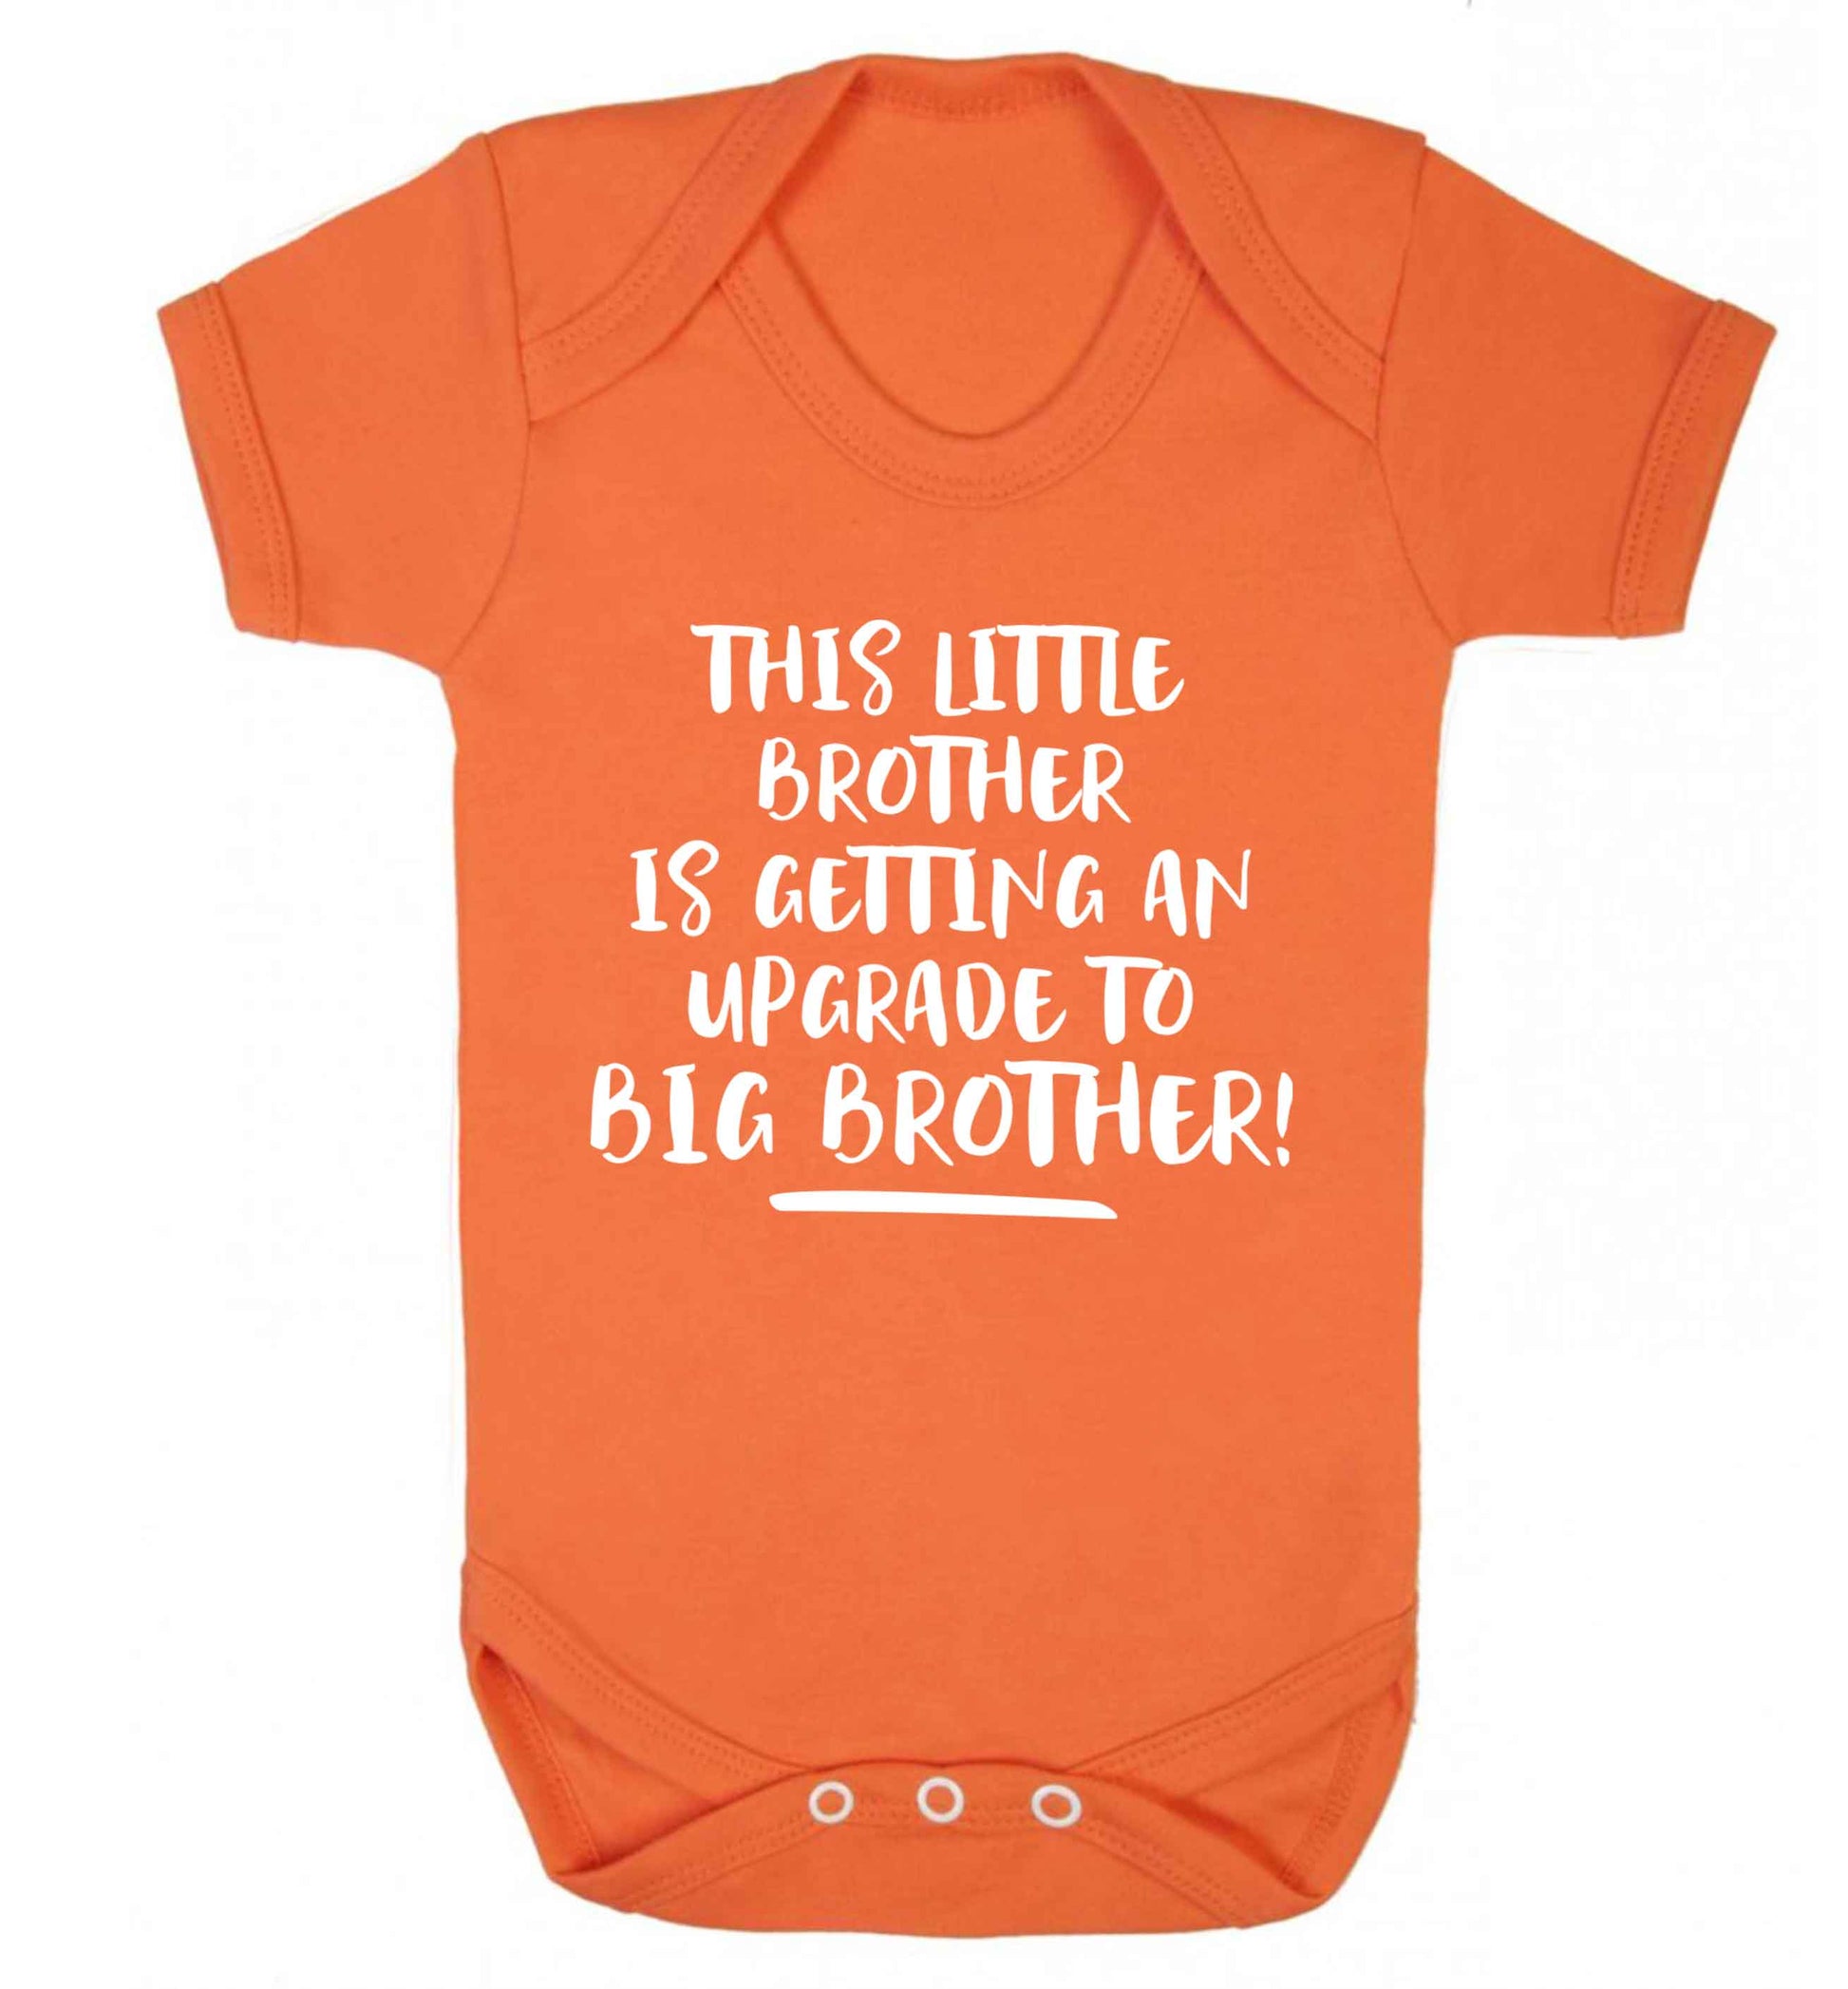 This little brother is getting an upgrade to big brother! Baby Vest orange 18-24 months